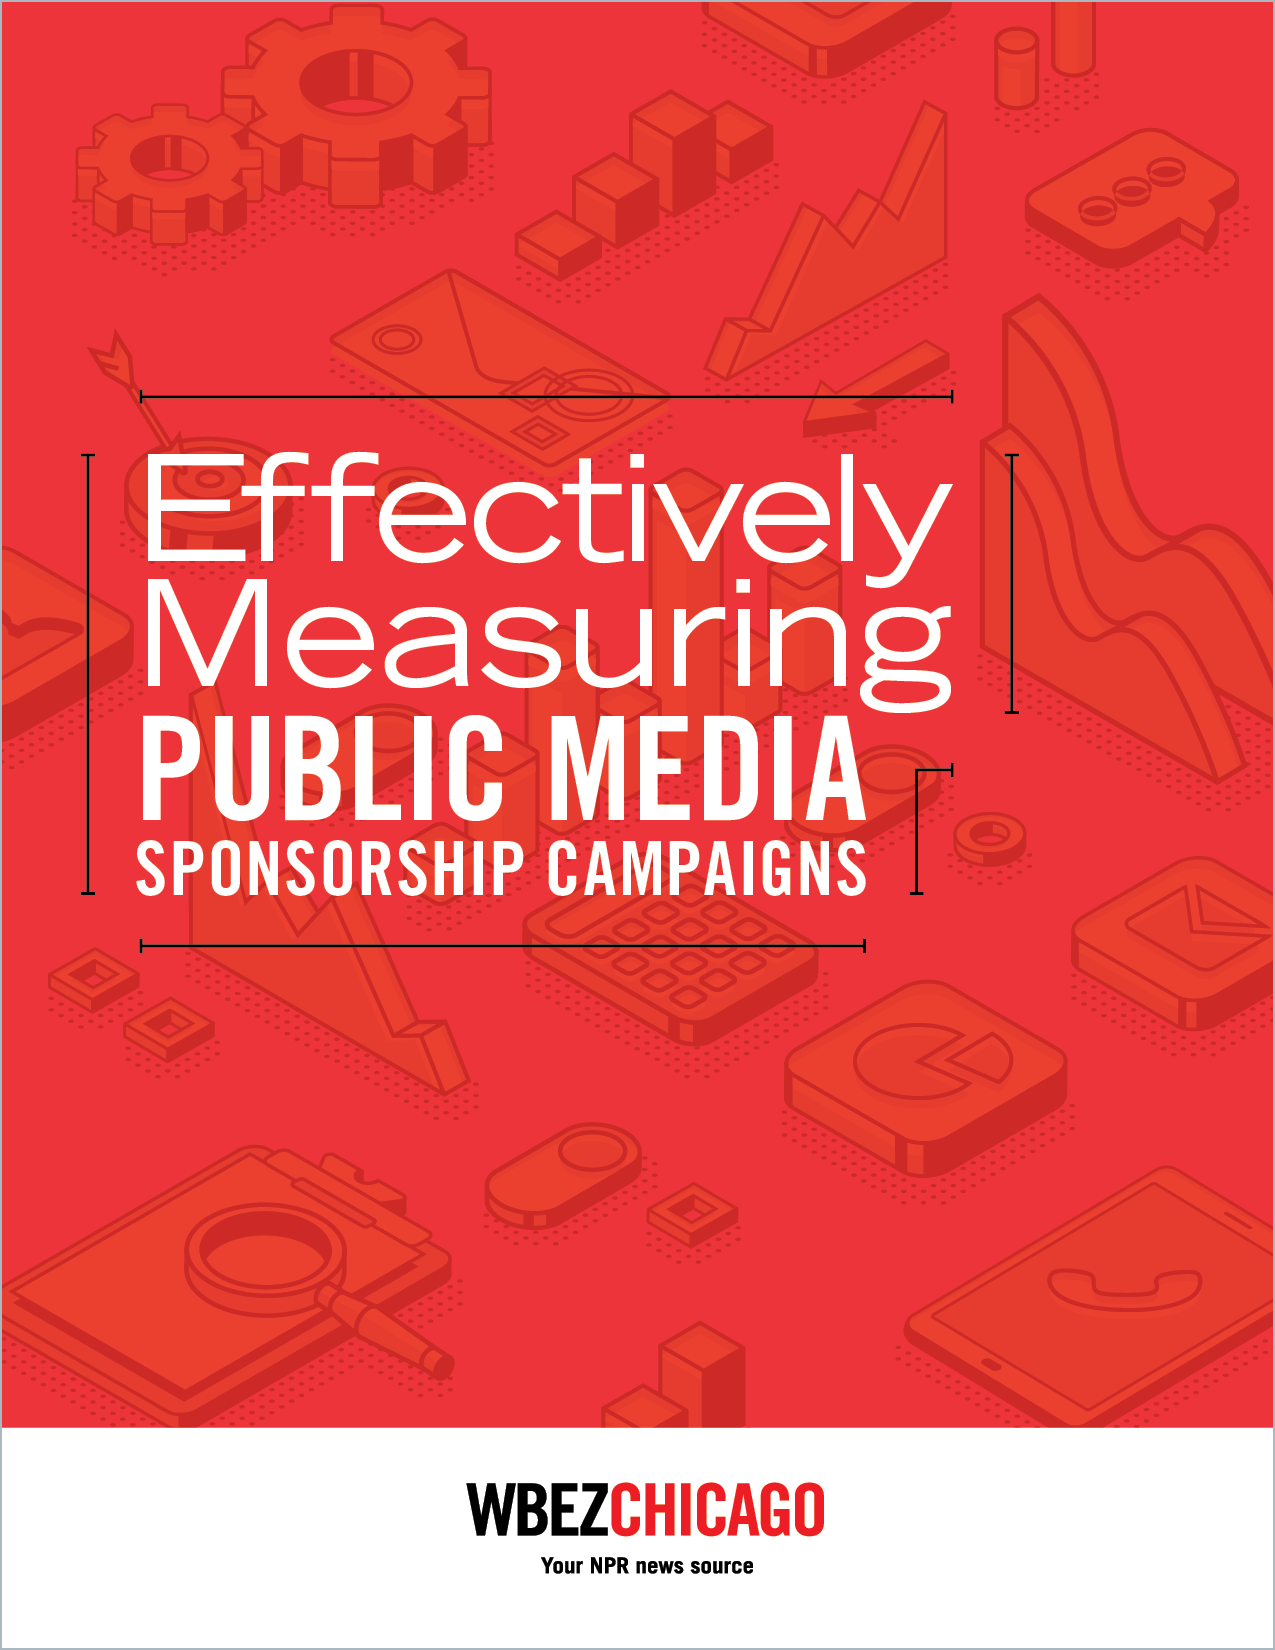 CHI_Effectively Measuring Public Media Sponsorship Campaigns_040822